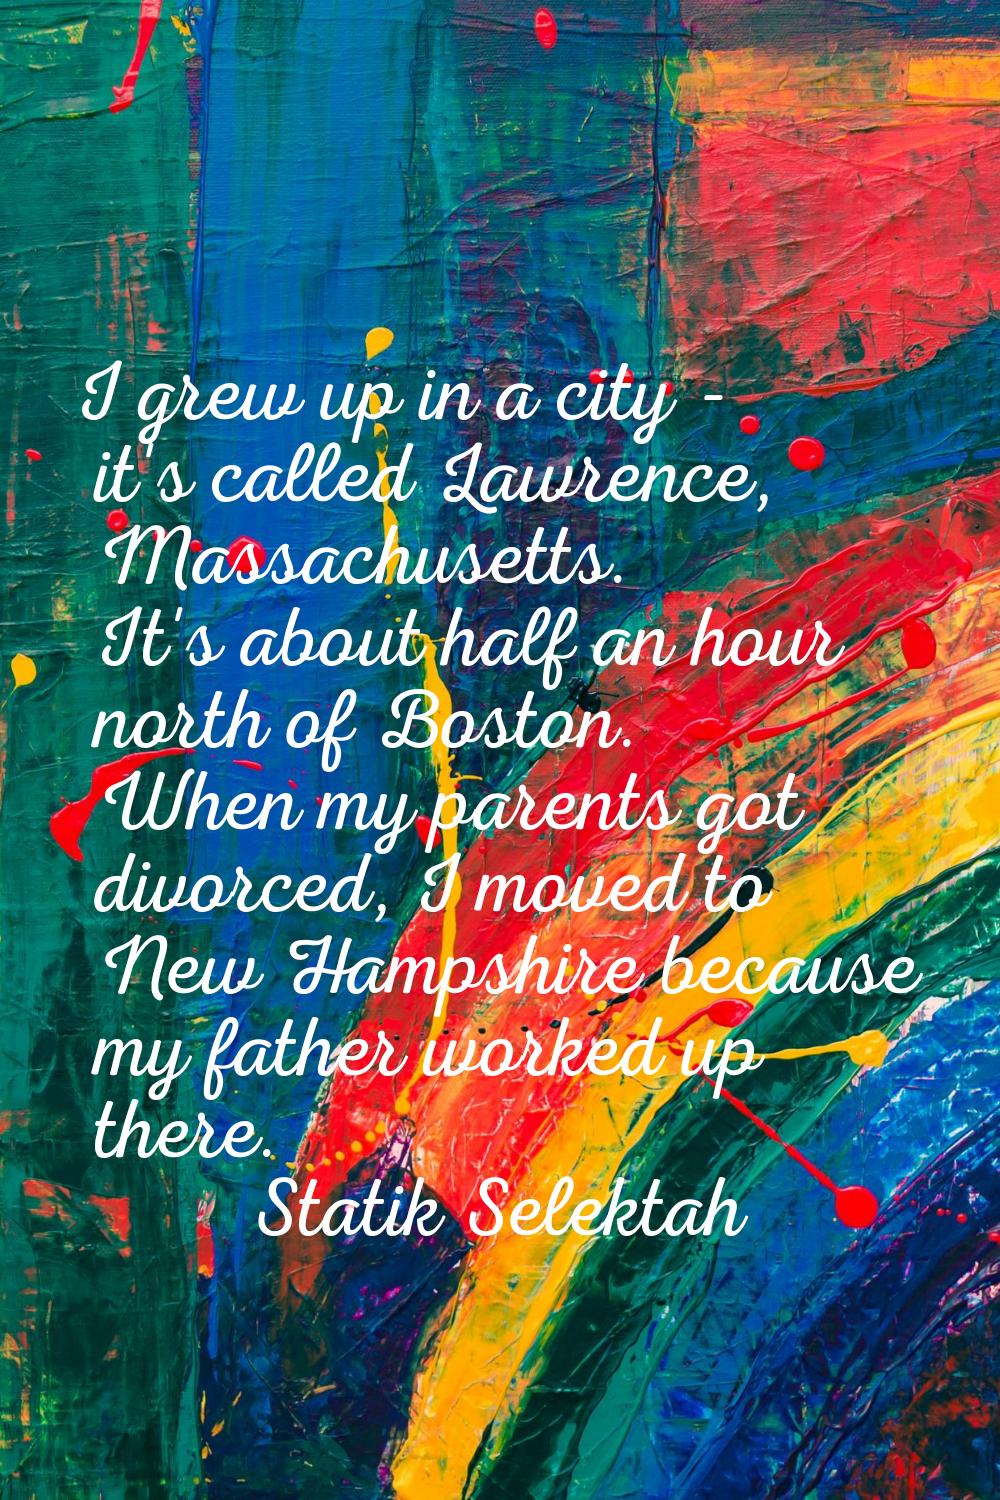 I grew up in a city - it's called Lawrence, Massachusetts. It's about half an hour north of Boston.